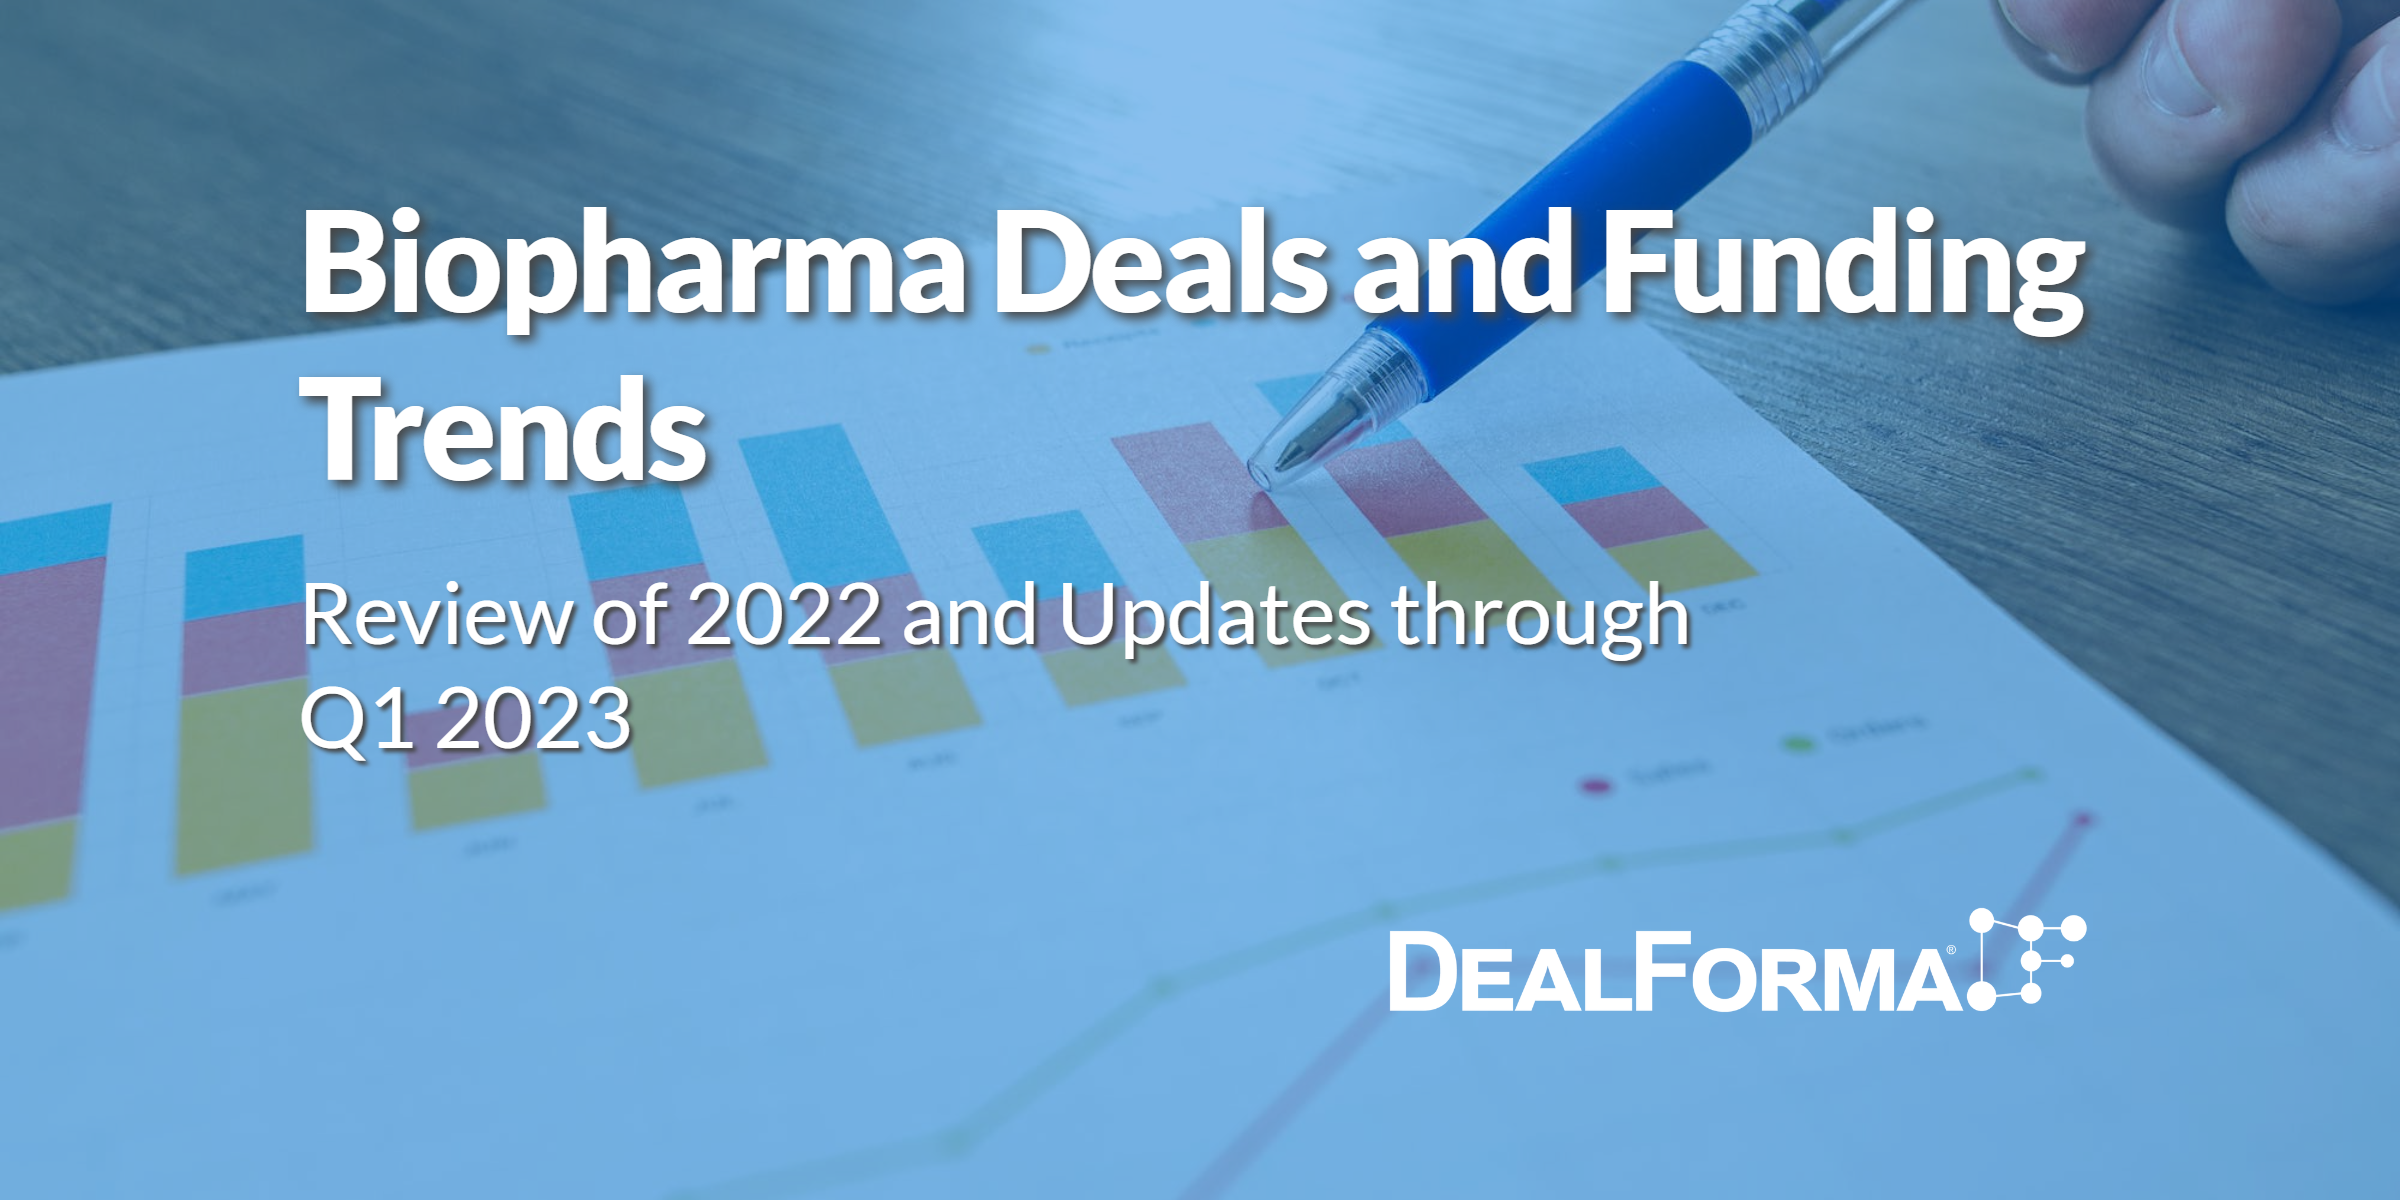 Biopharma Deals and Funding Trends through Q1 2023 from DealForma